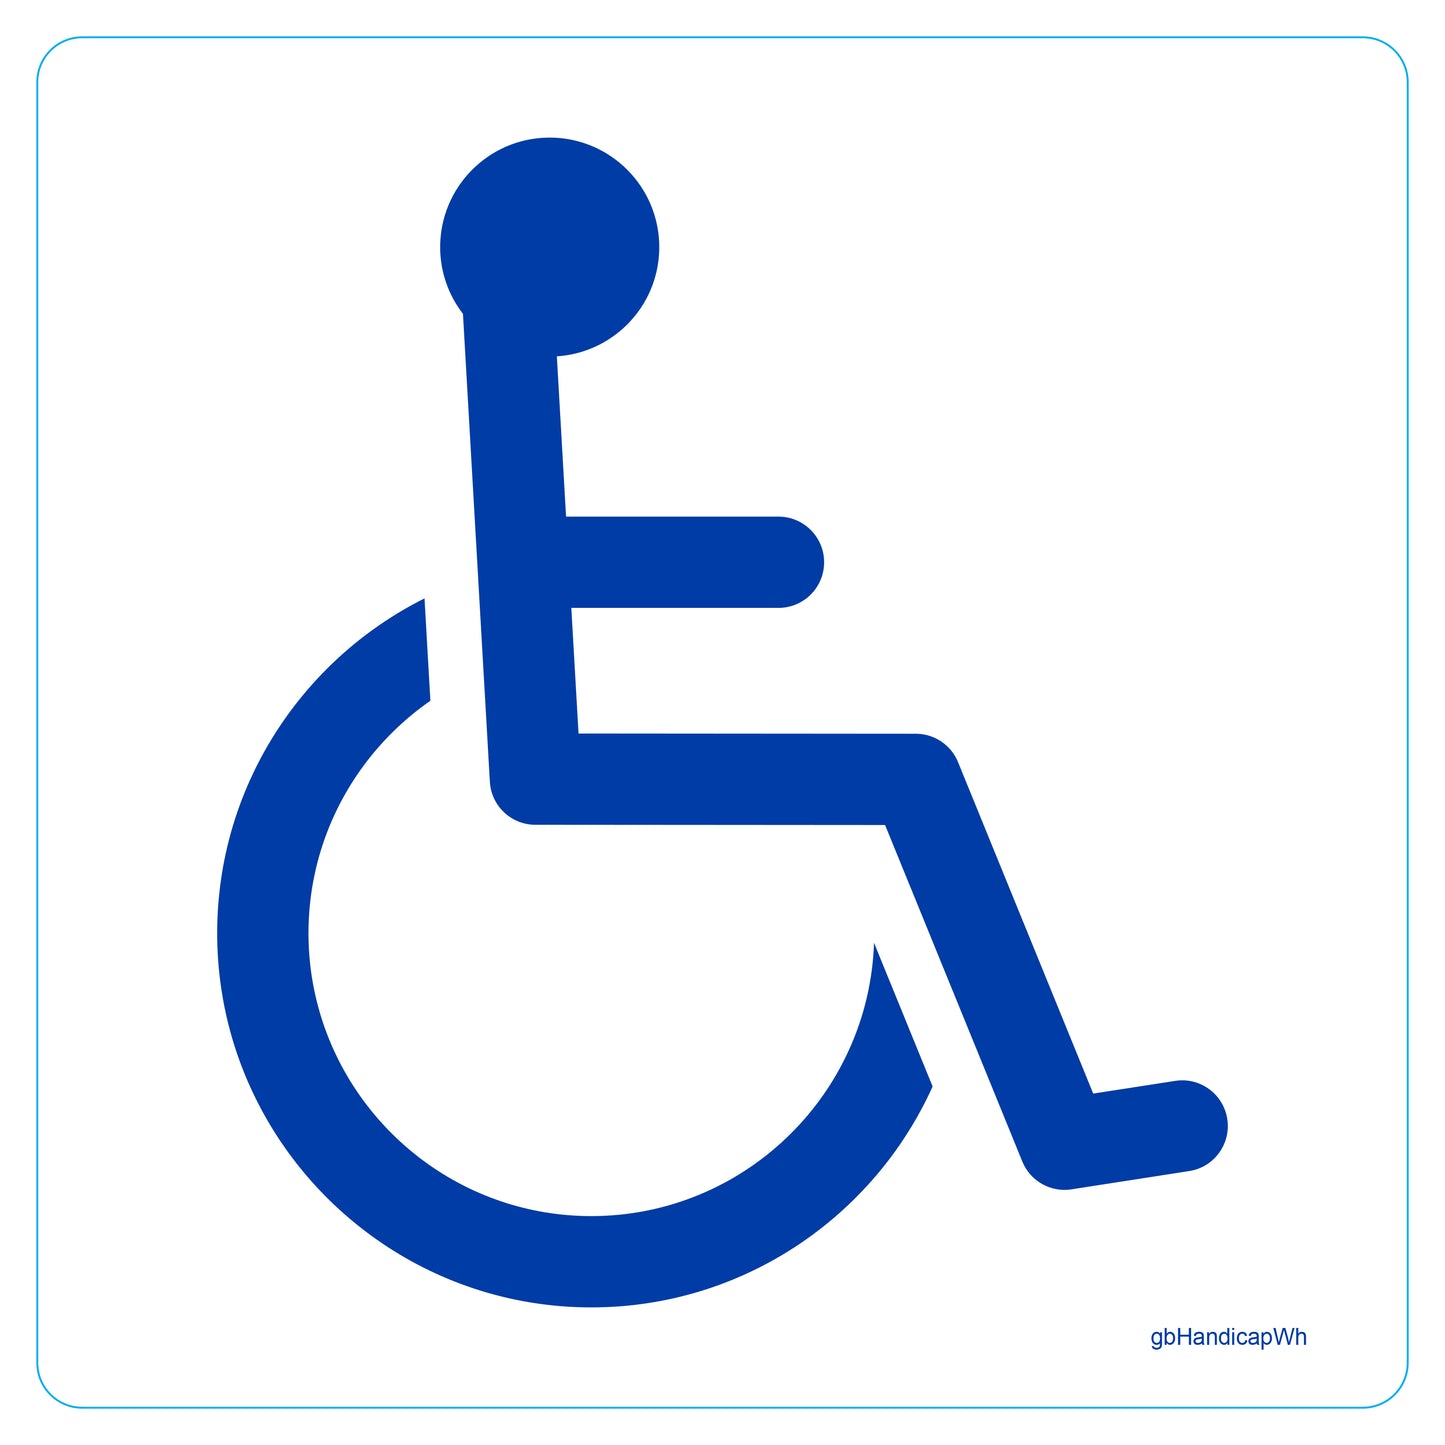 ADA Handicap Decal in White. 4 inches by 3 inches in size.